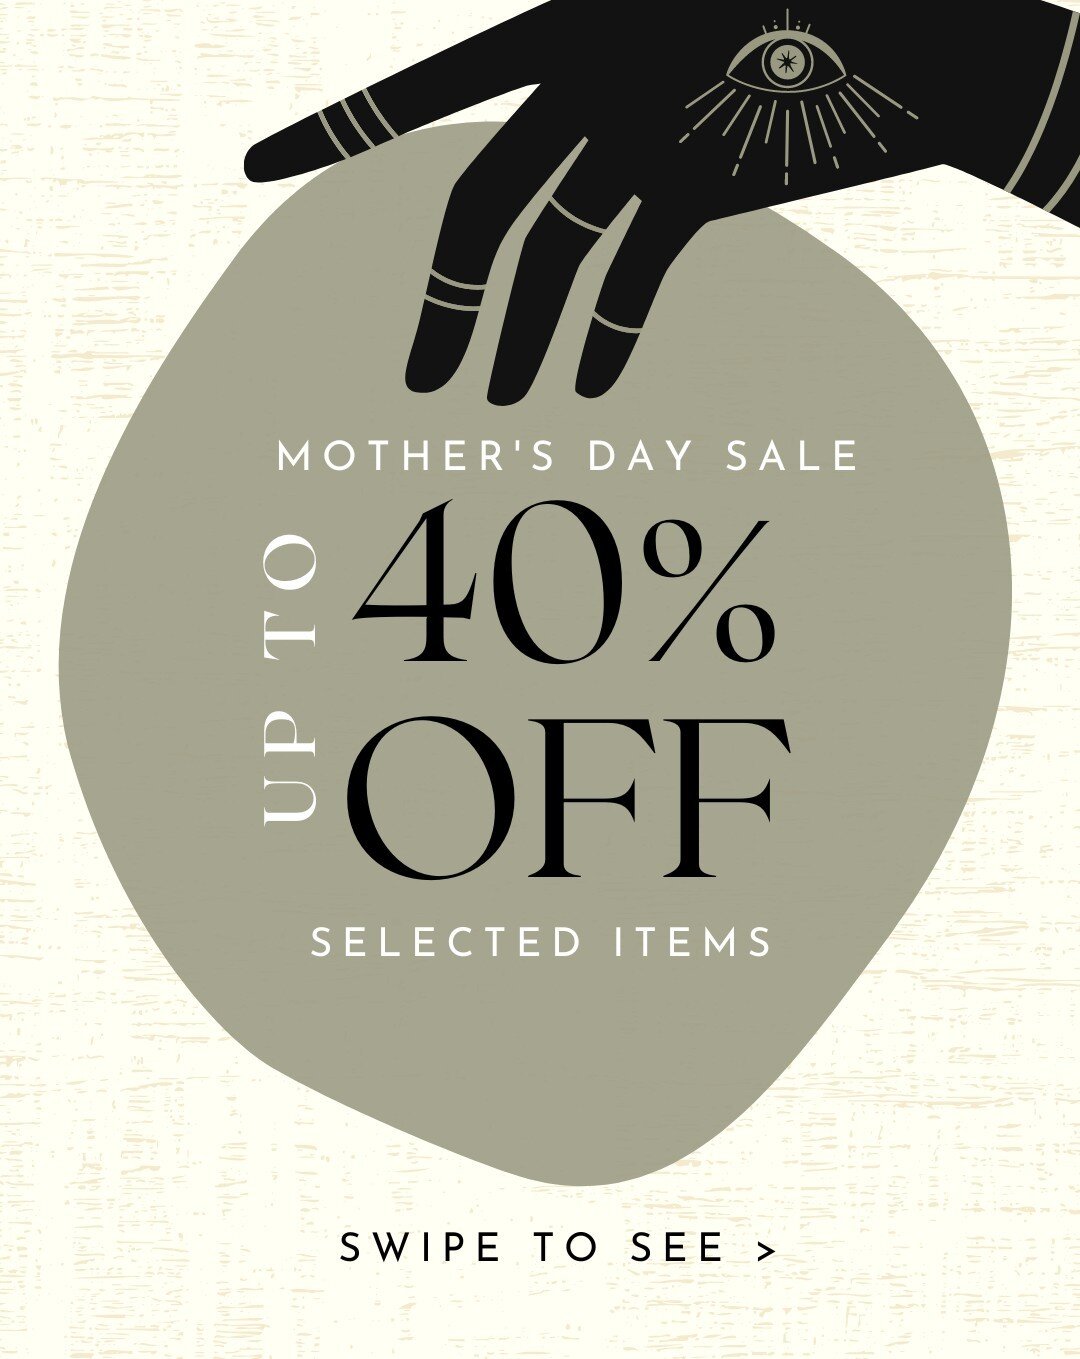 It's ON beautiful humans! Up to 40% off the Soul Silver website. Selected items - very limited stock available. Our biggest sale yet! Tell your friends and snag that timeless piece that's just meant for you. 

Sale ends 14 May!